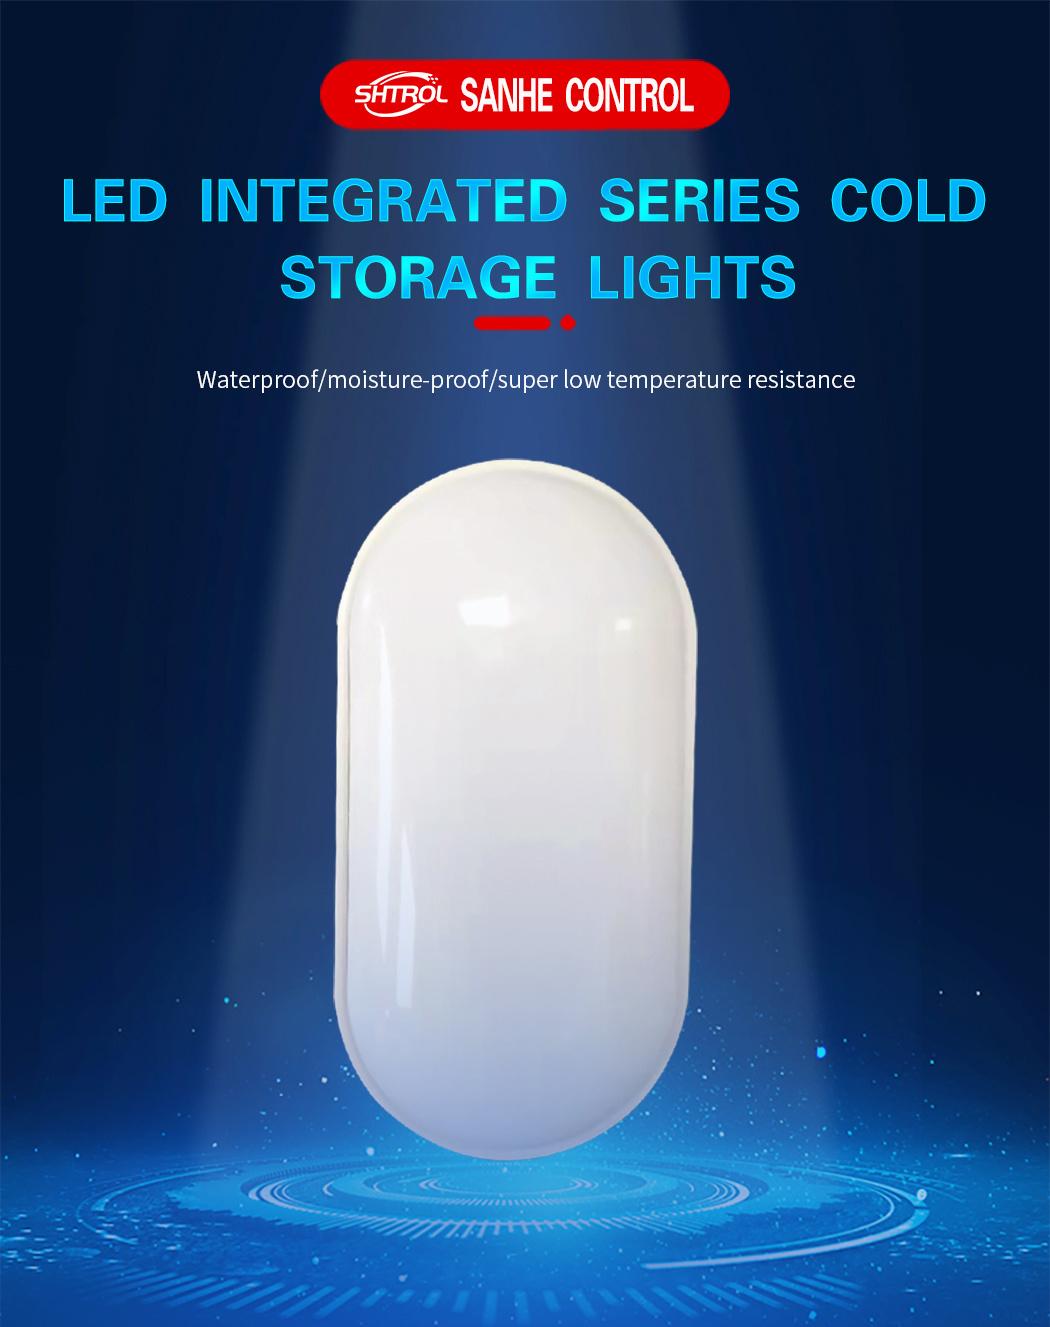 LED Waterproof, Moisture-Proof and Low-Temperature Resistant Cold Storage Lights